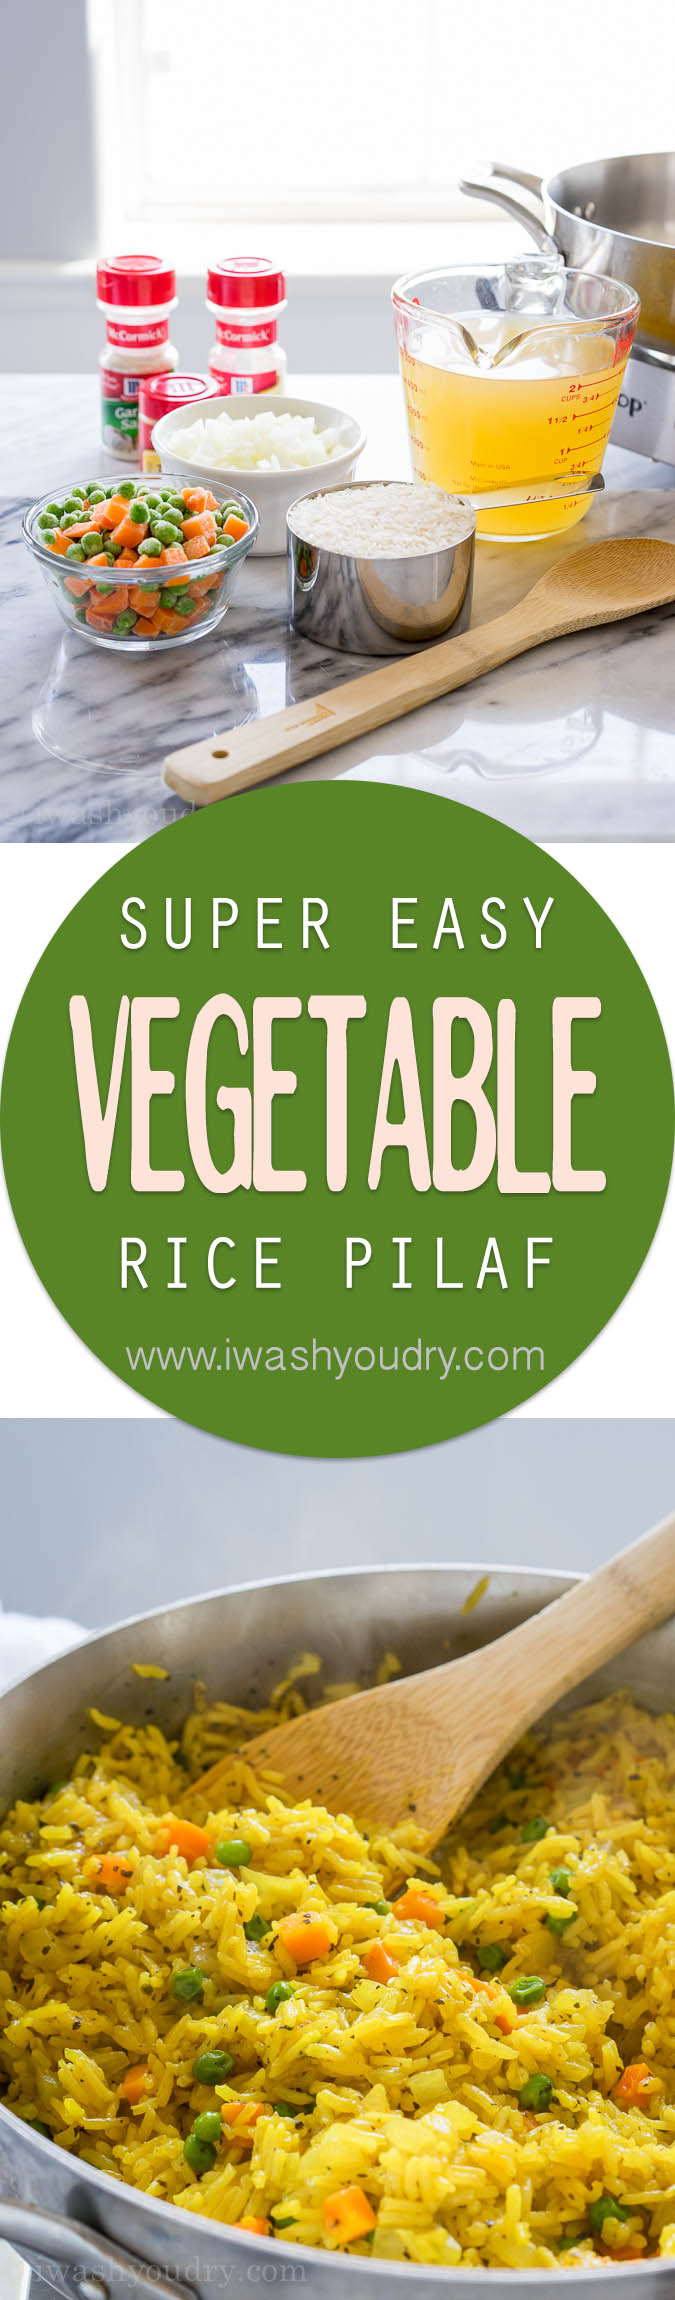 This quick and easy Vegetable Rice Pilaf is a homemade version of the boxed rice variety. My family loves this with dinner!